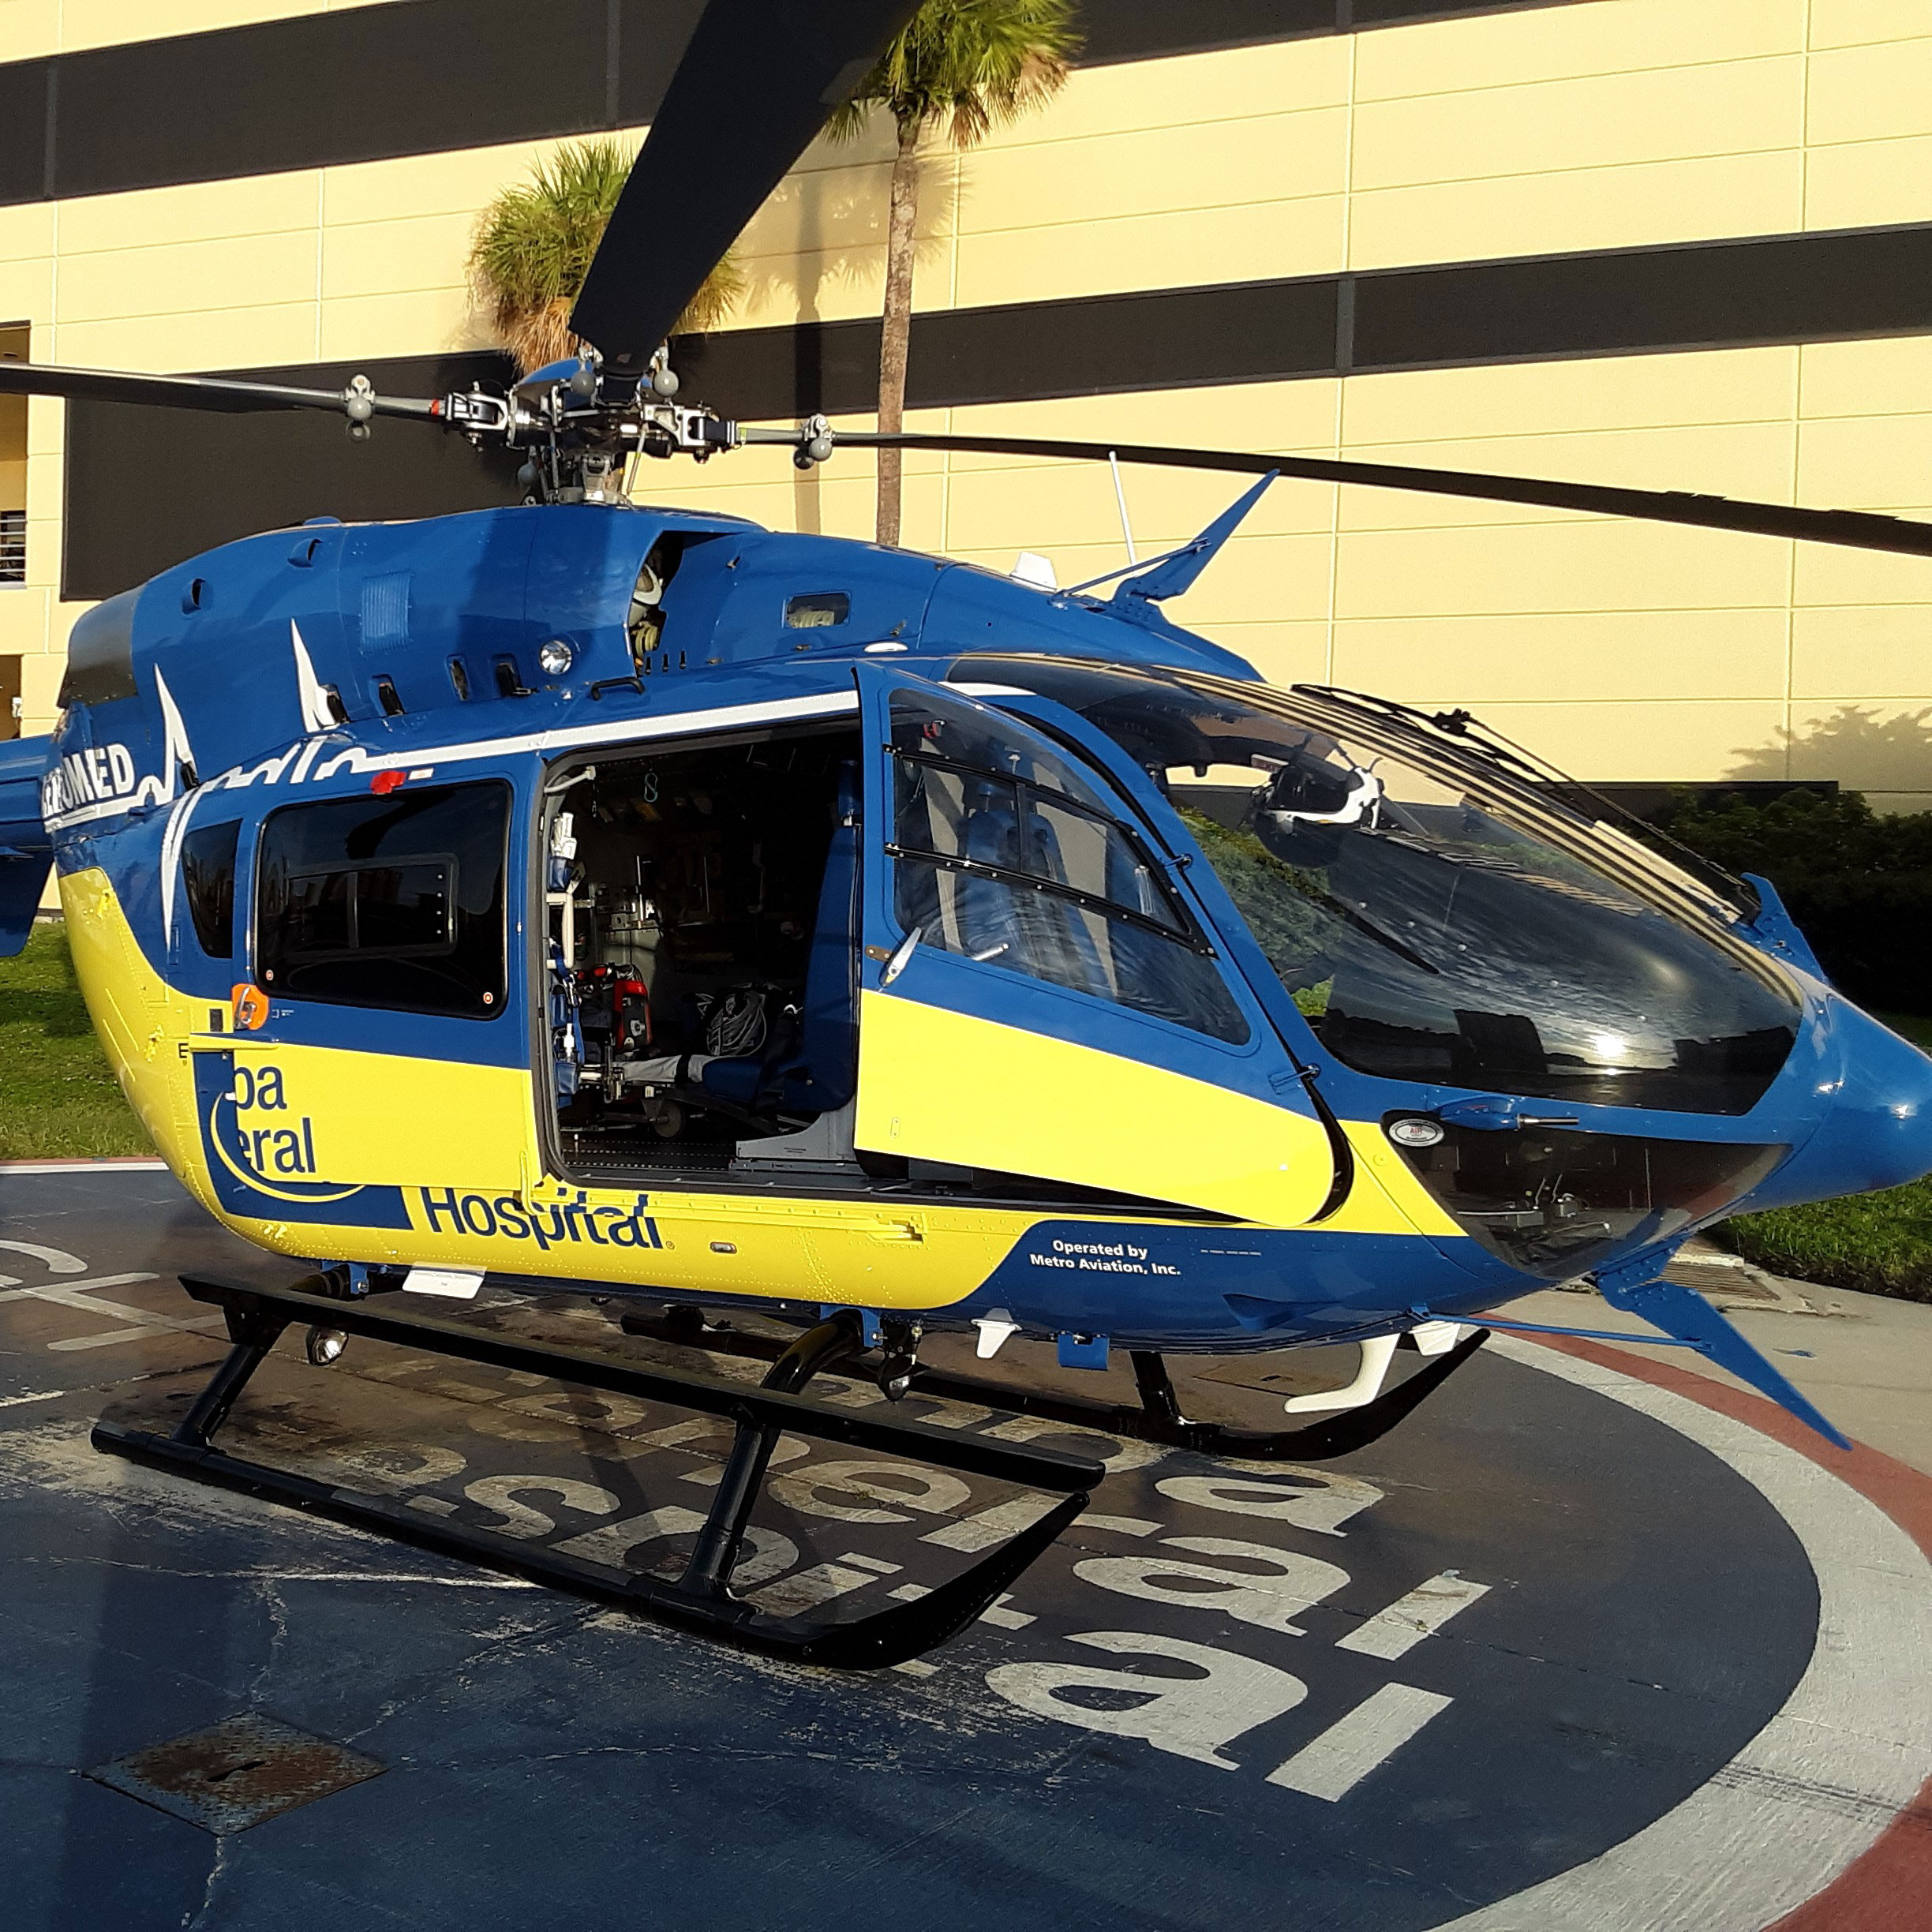 The EC 145 Airbus averages three flights per day to save lives